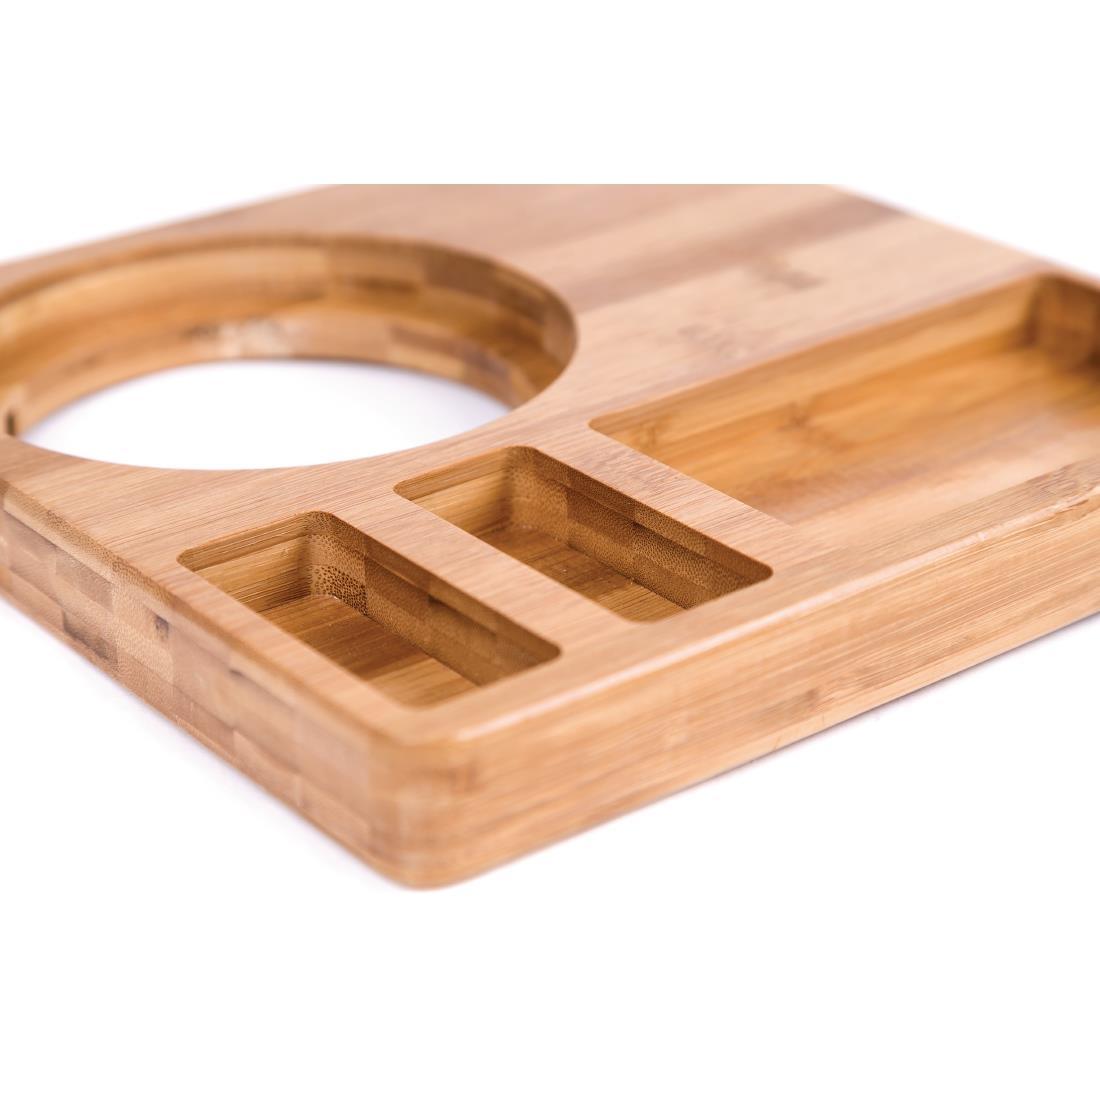 Bamboo Hotel Welcome Tray - CL082  - 3